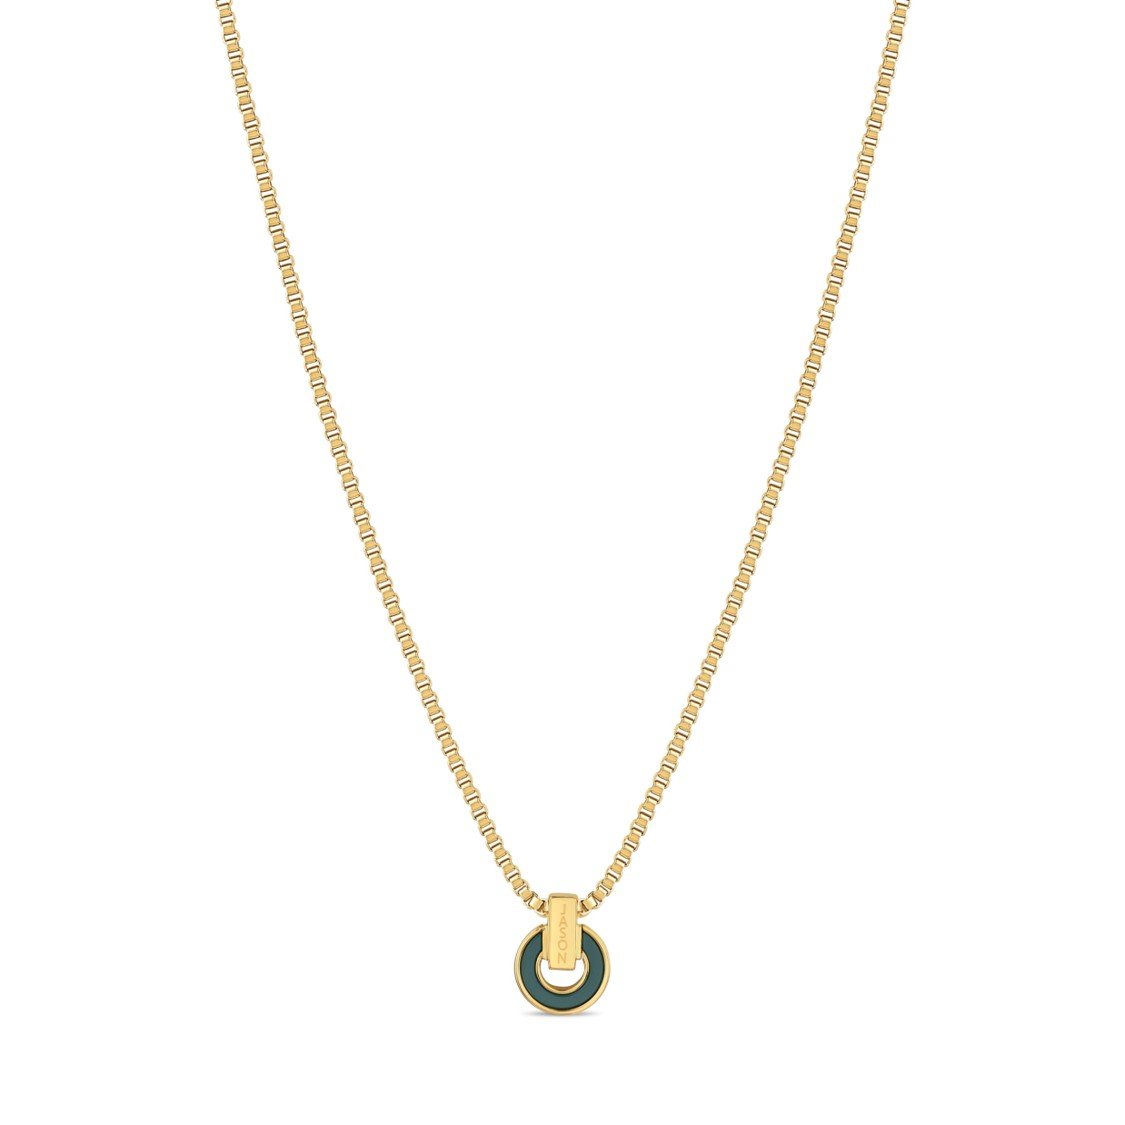 NEREIDA STERLING SILVER 18K GOLD PLATED GREEN CHIP NECKLACE